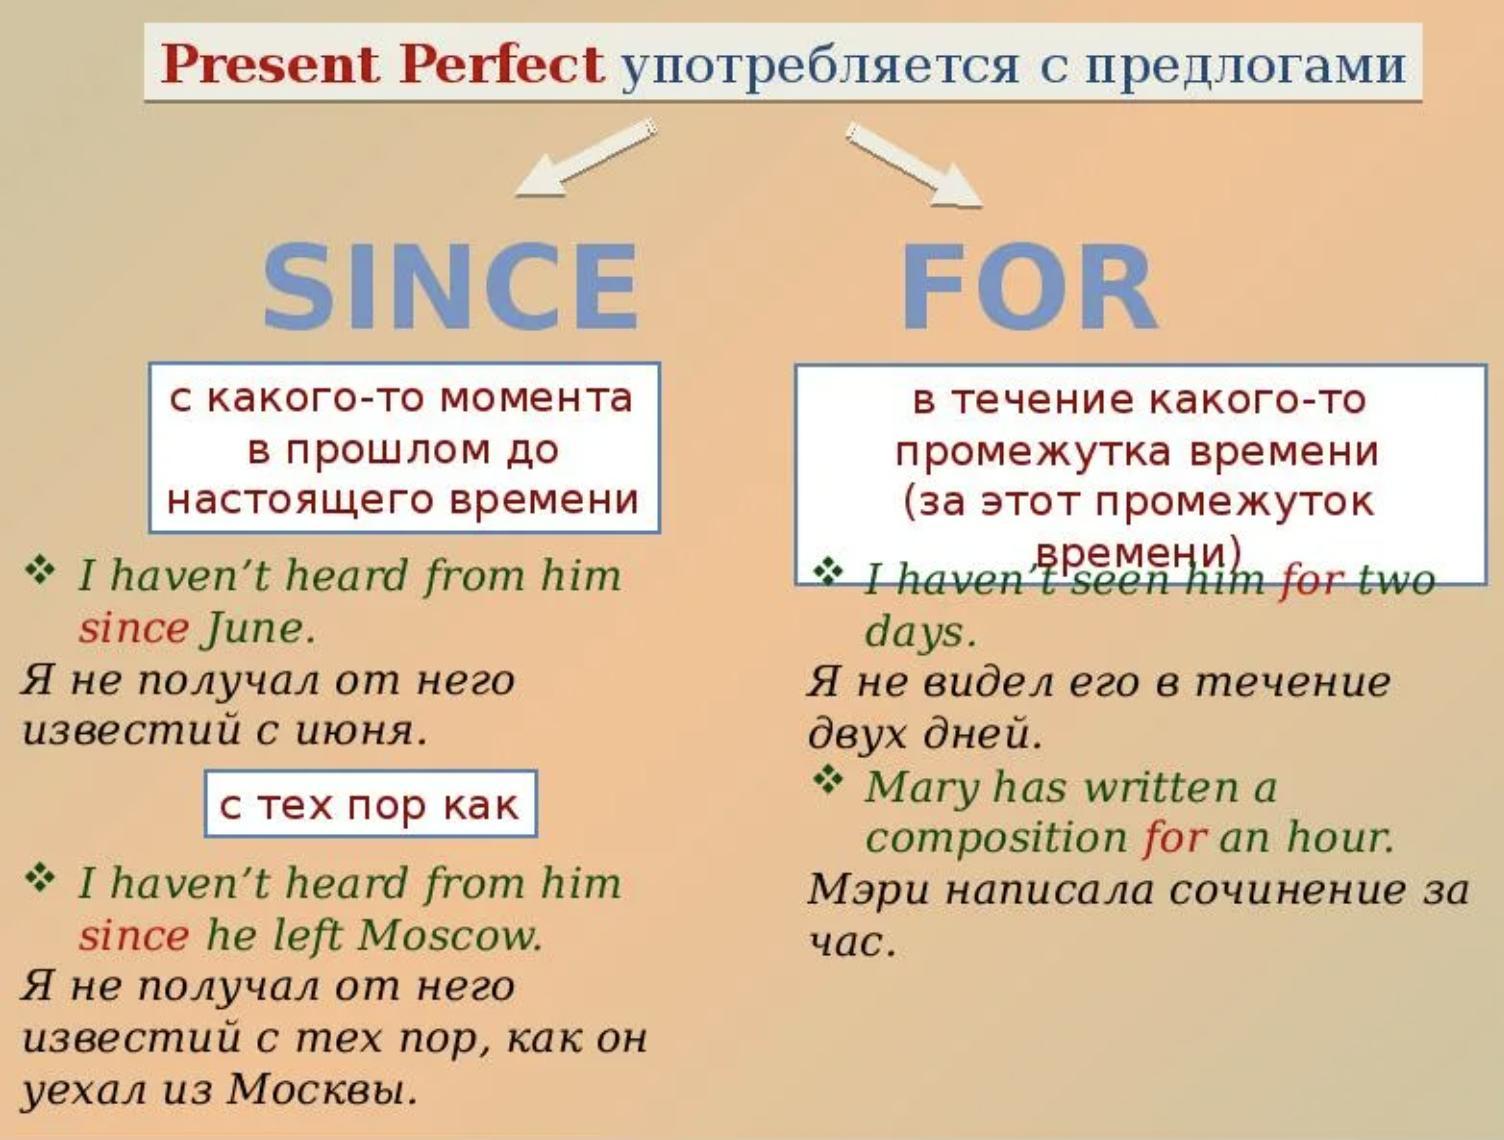 Perfect случаи употребления. Present perfect since for правило. Употребление since и for в present perfect. Правило for и since в английском языке. Since for present perfect.